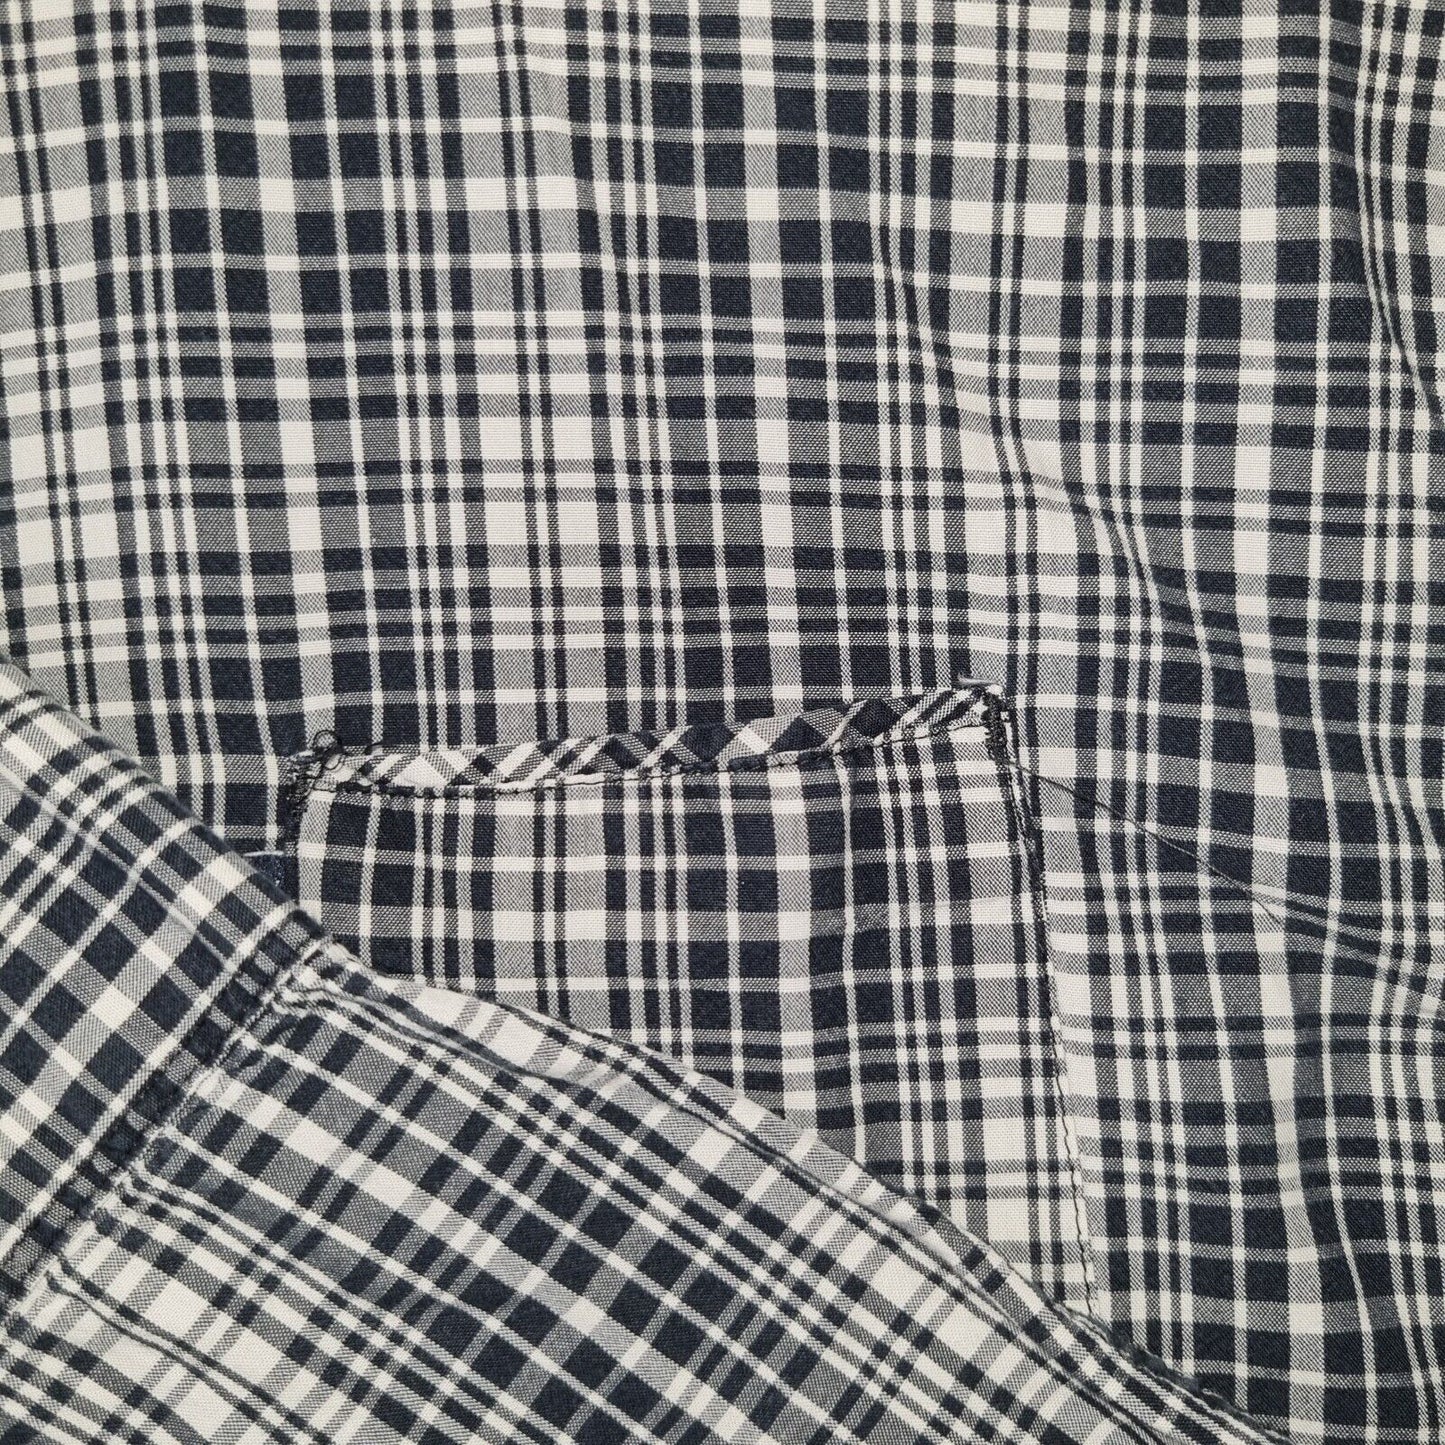 Paul Smith Mens Shirt Chequered Black And White